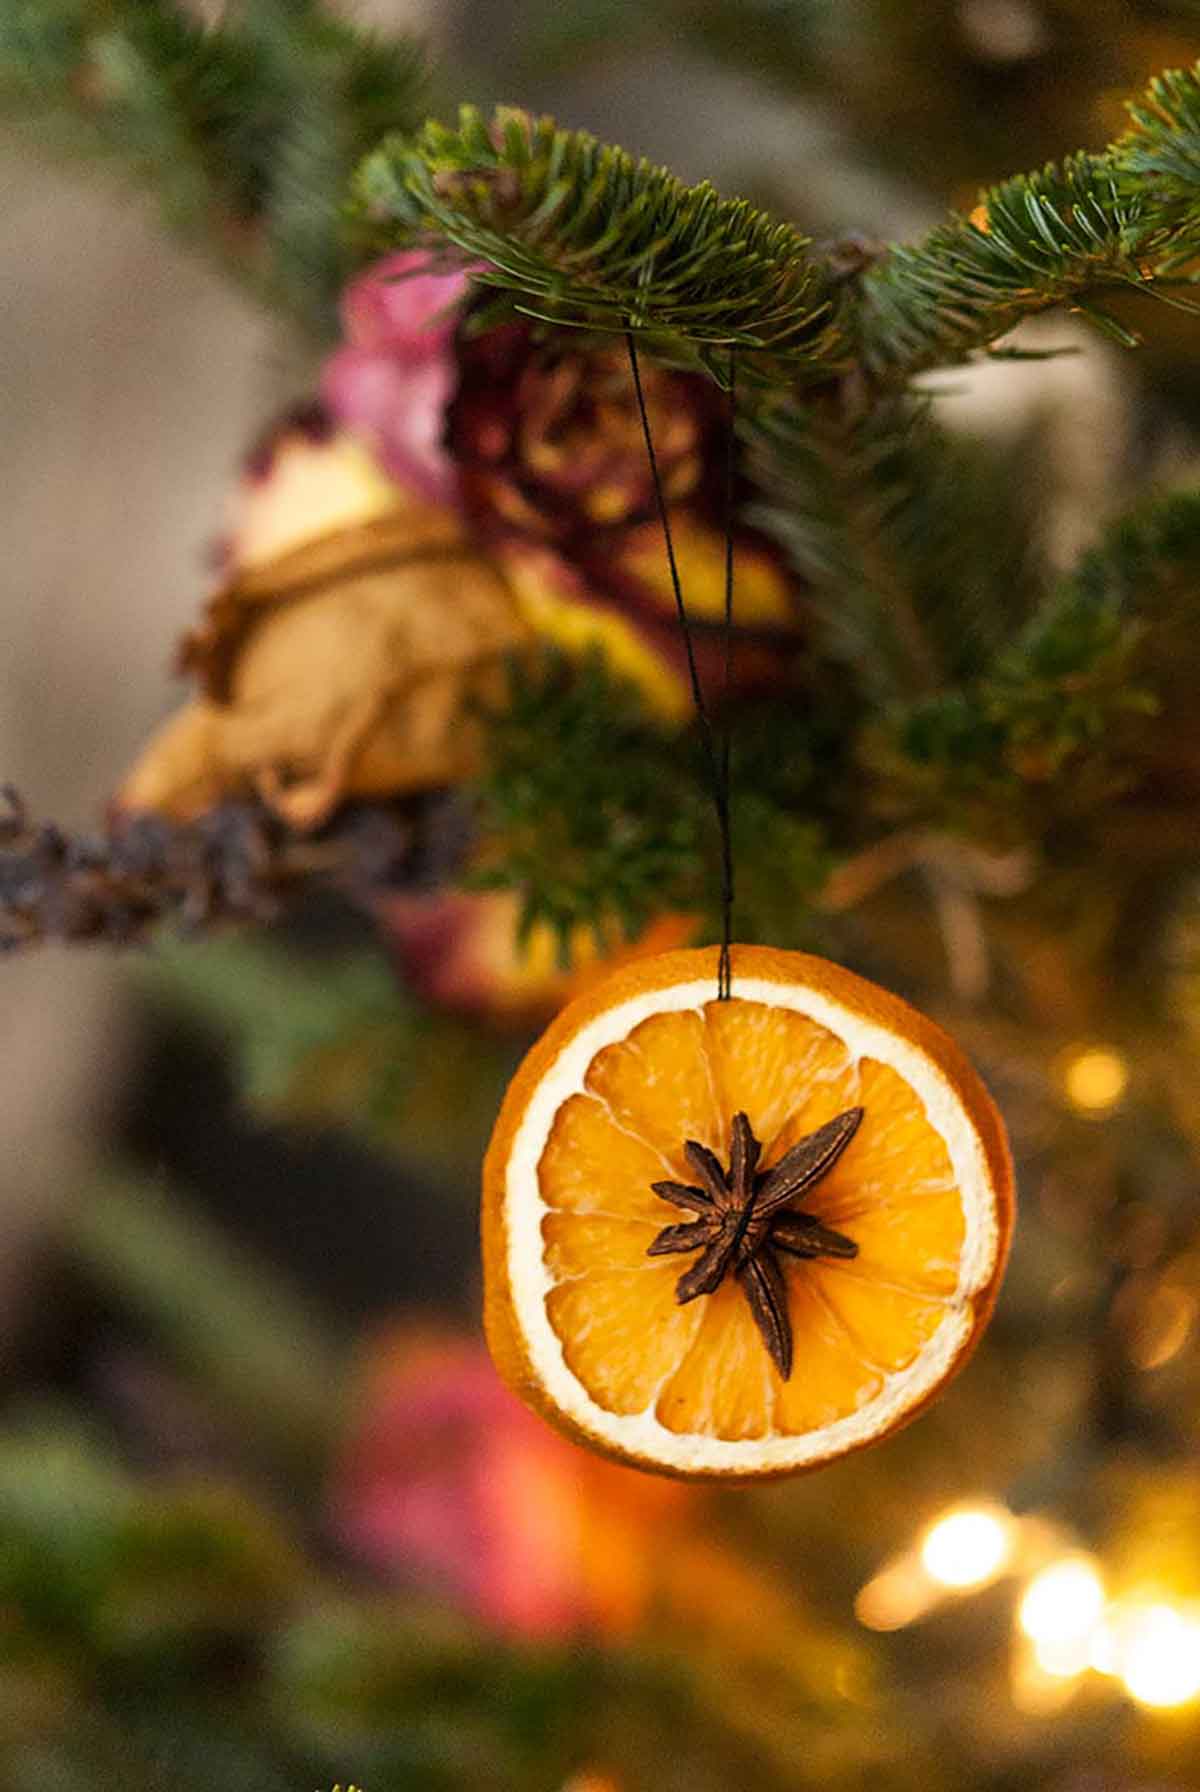 A dried orange slice with star anise in the center hanging on a Christmas tree.